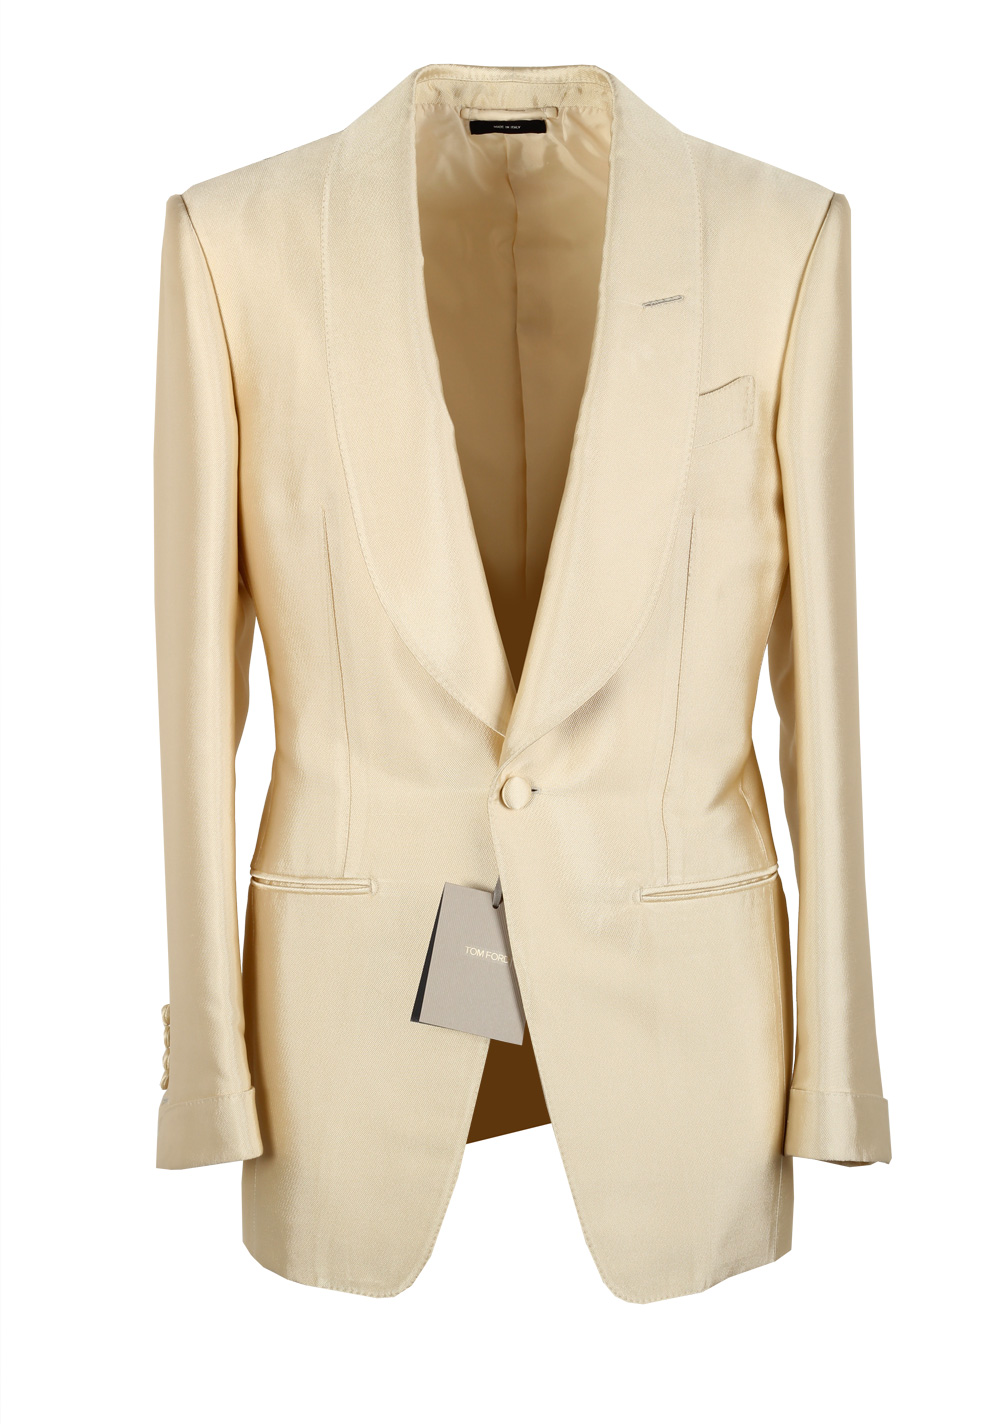 TOM FORD Off White Tuxedo Dinner Jacket Size 46 / 36R U.S. | Costume Limité